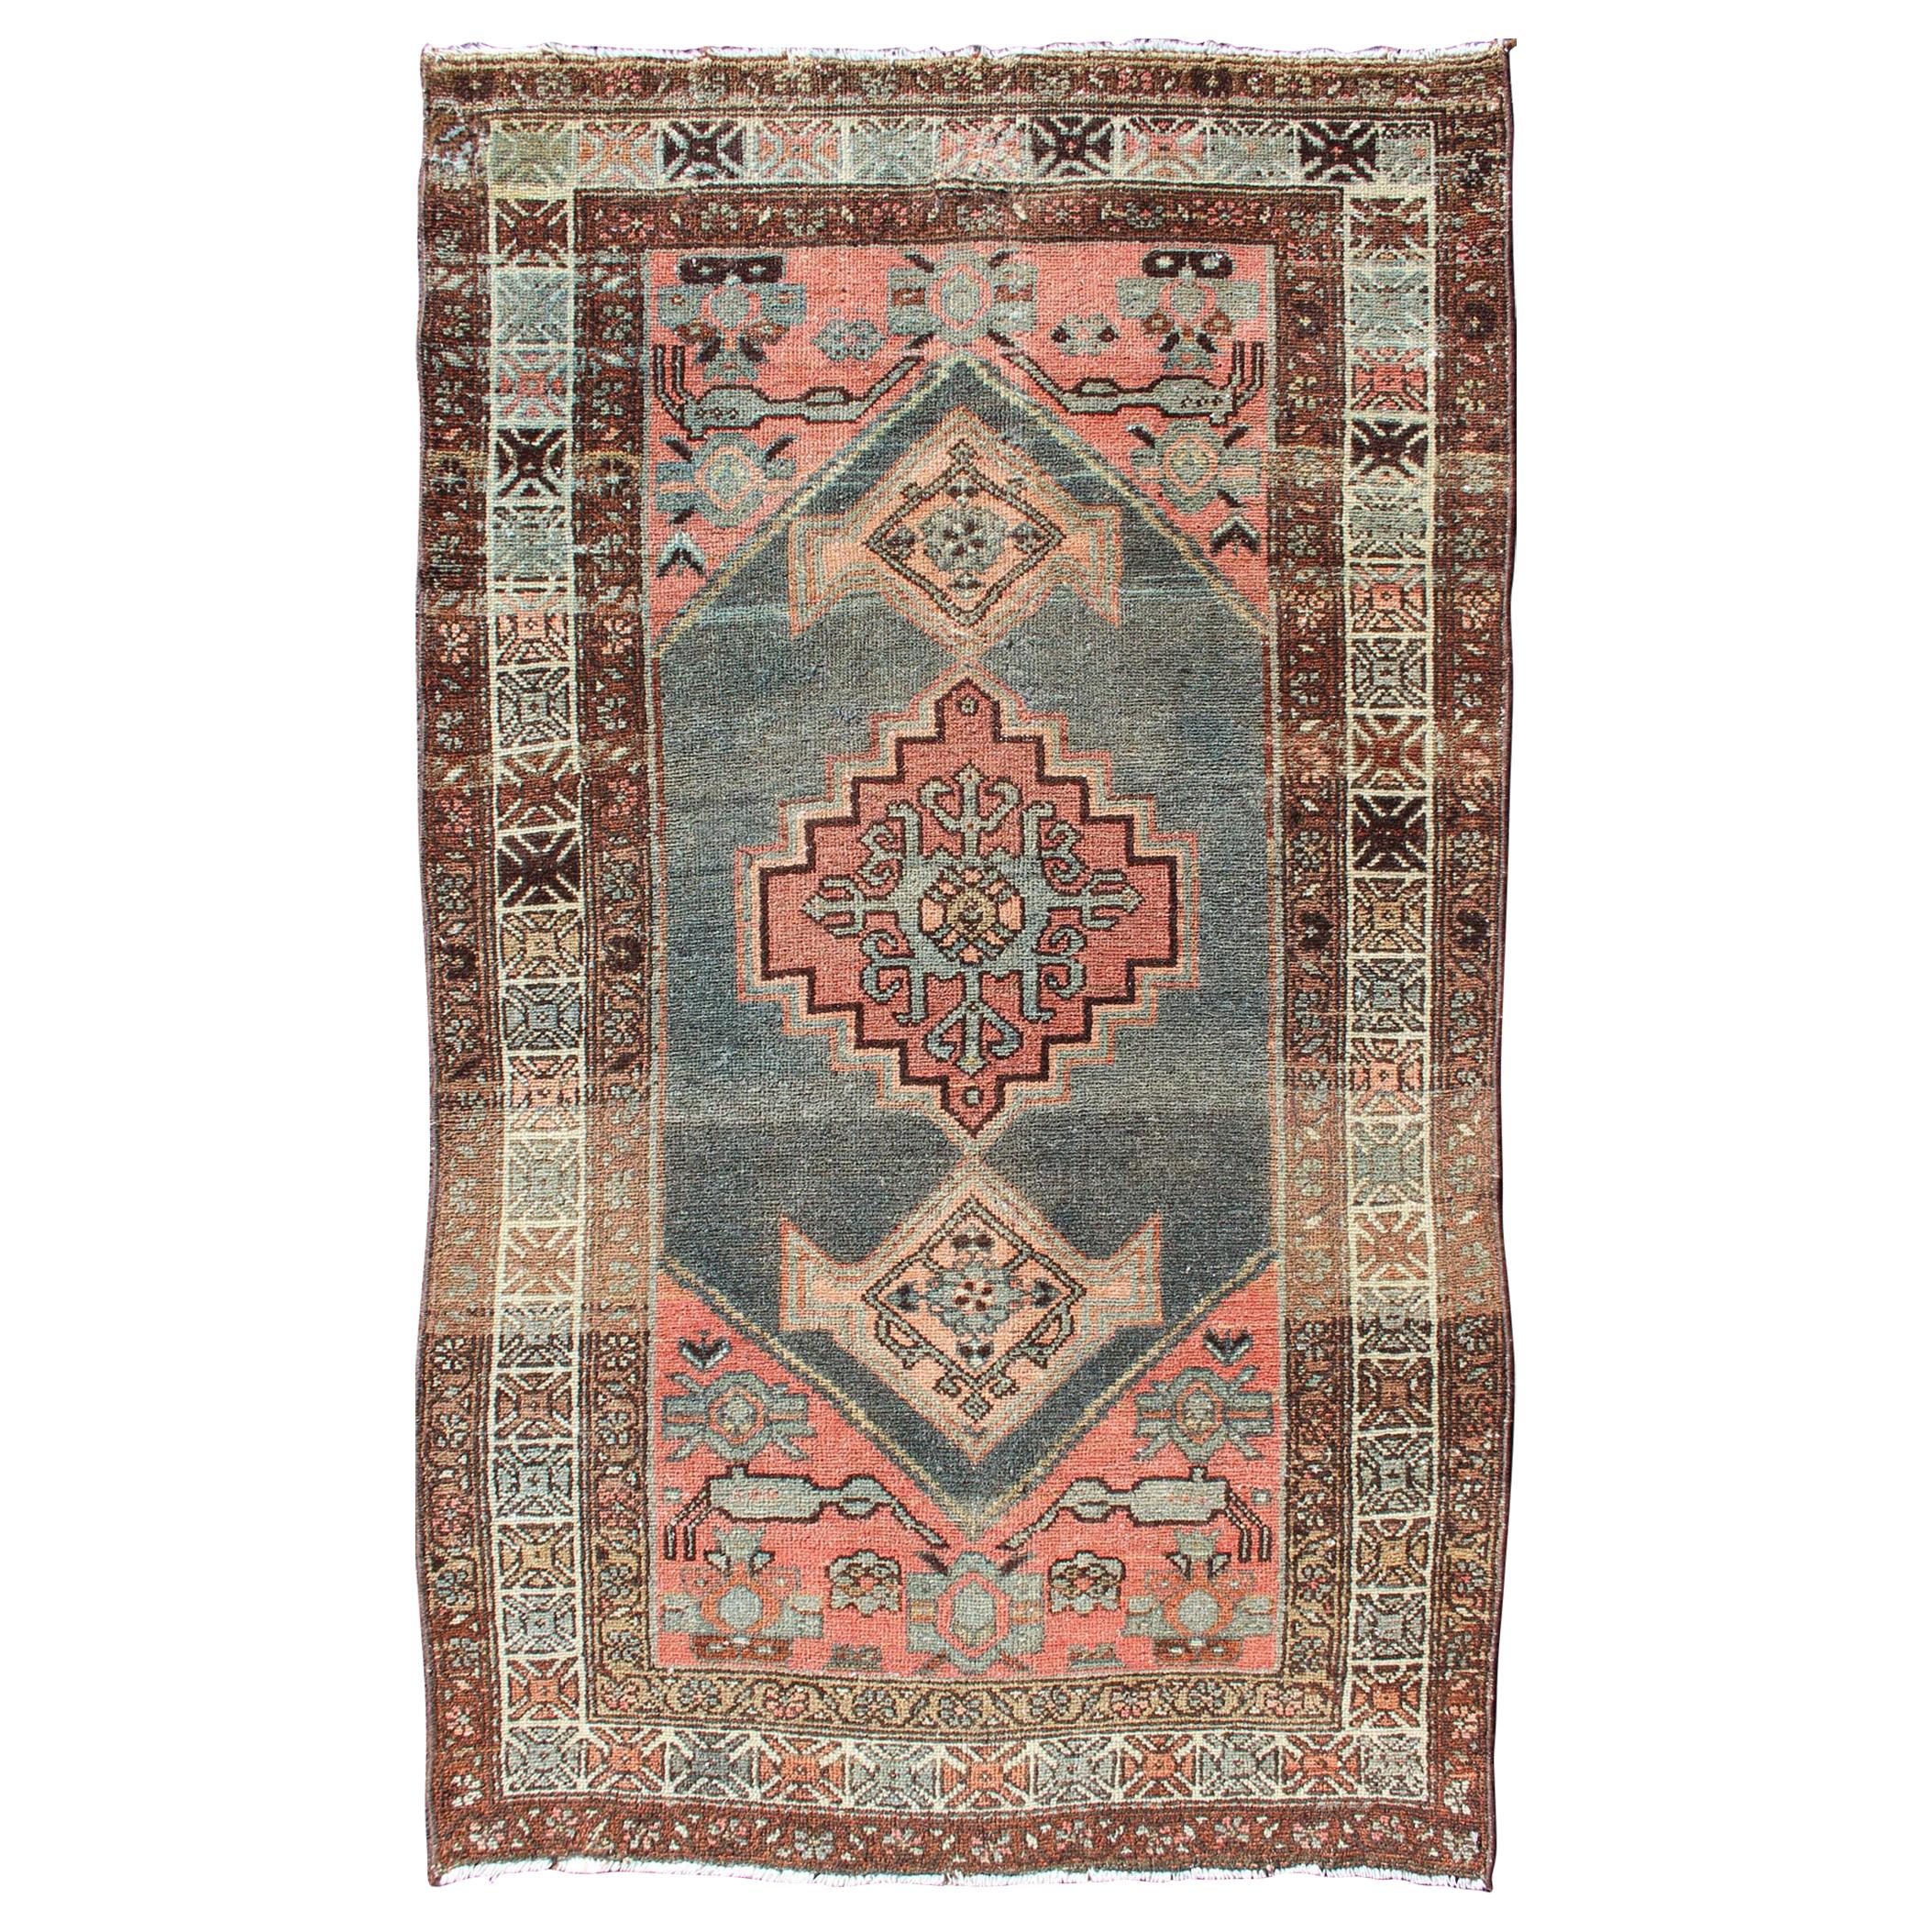 Antique Persian Hamadan Rug with Large Medallion in Pink and Gray